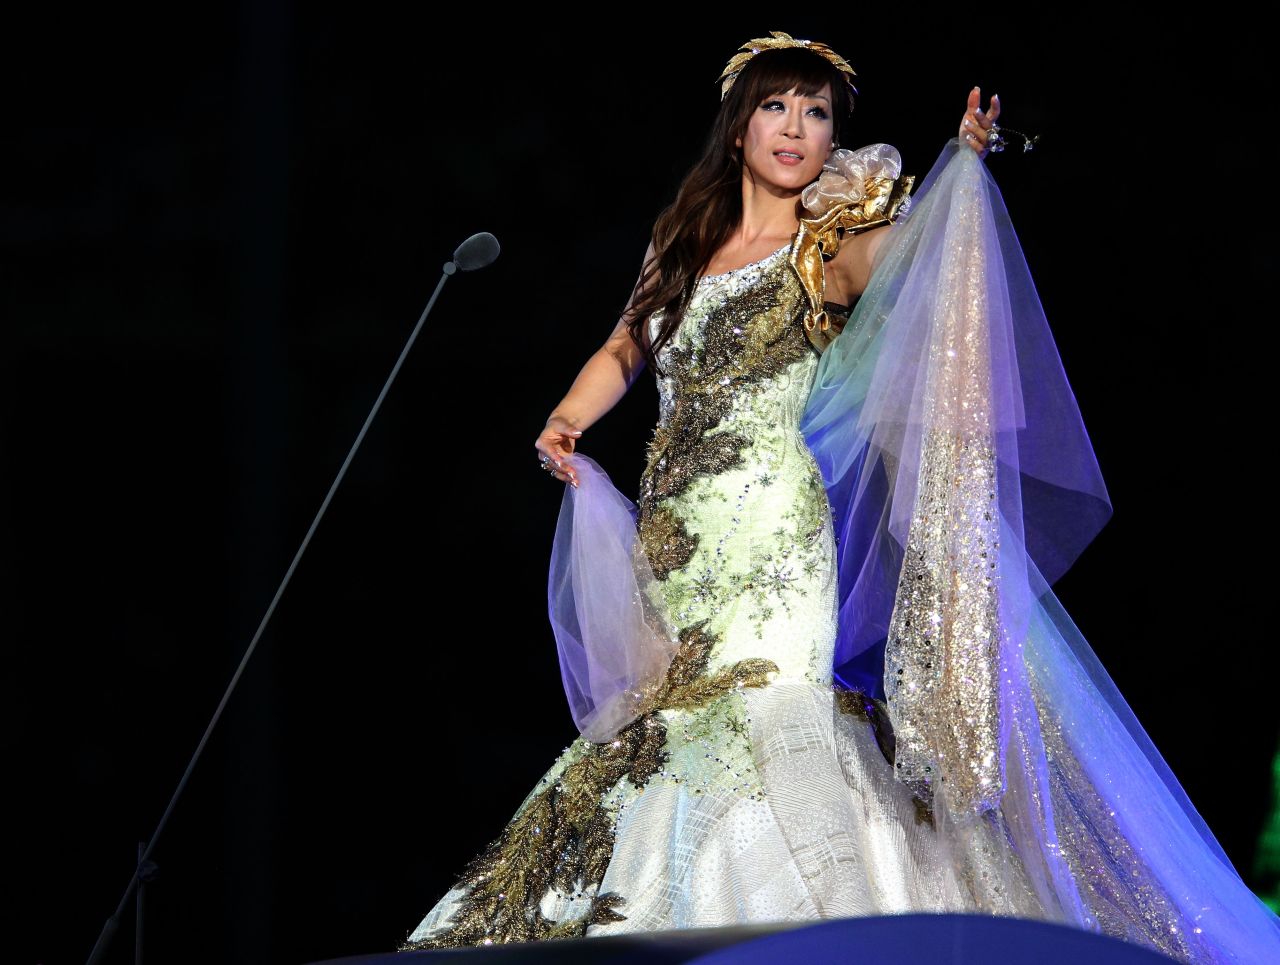 Sumi Jo performing at the Opening Ceremony of the IAAF World Athletics Championships in Daegu, South Korea in August 2011. She also performed at the 2008 Beijing Olympic Games and the 2002 Football World Cup in South Korea.